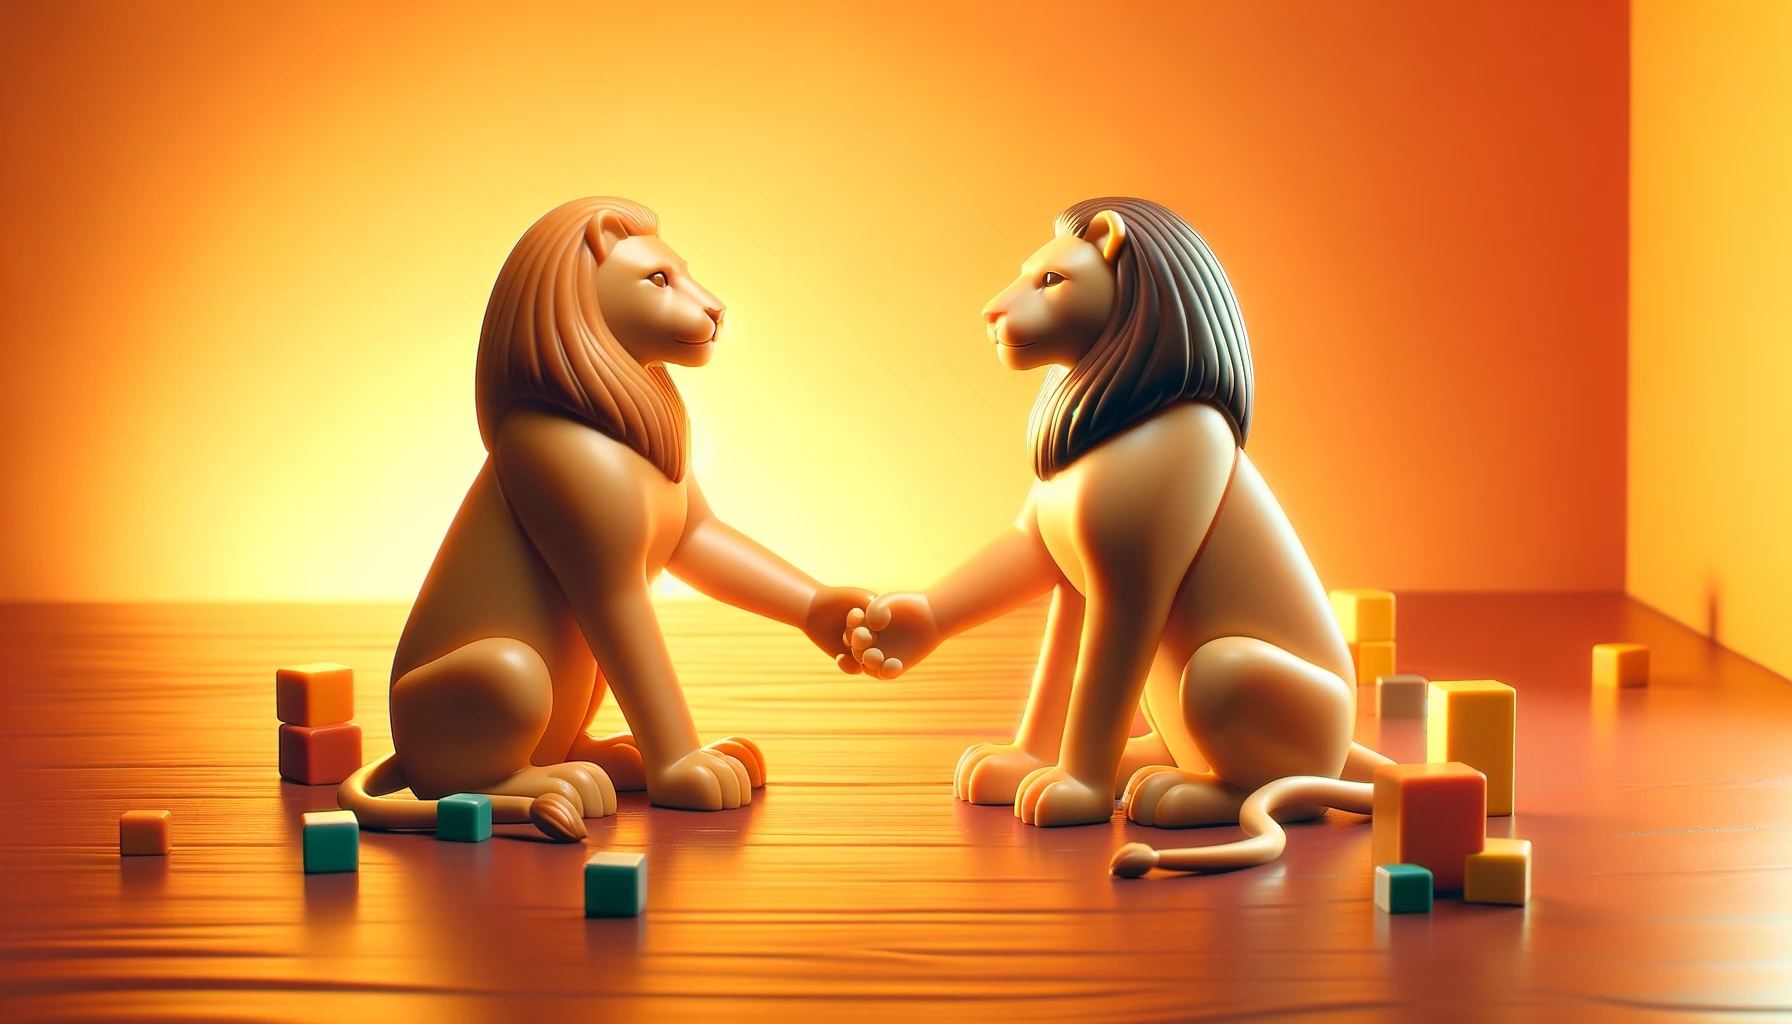 ultra-realistic image of two toy female lionesses sitting together, looking out over the sea, and holding hands, symbolizing partnership and diversity. The scene is set against a vibrant orange background, illuminated by warm lighting to enhance the feeling of a safe and welcoming space